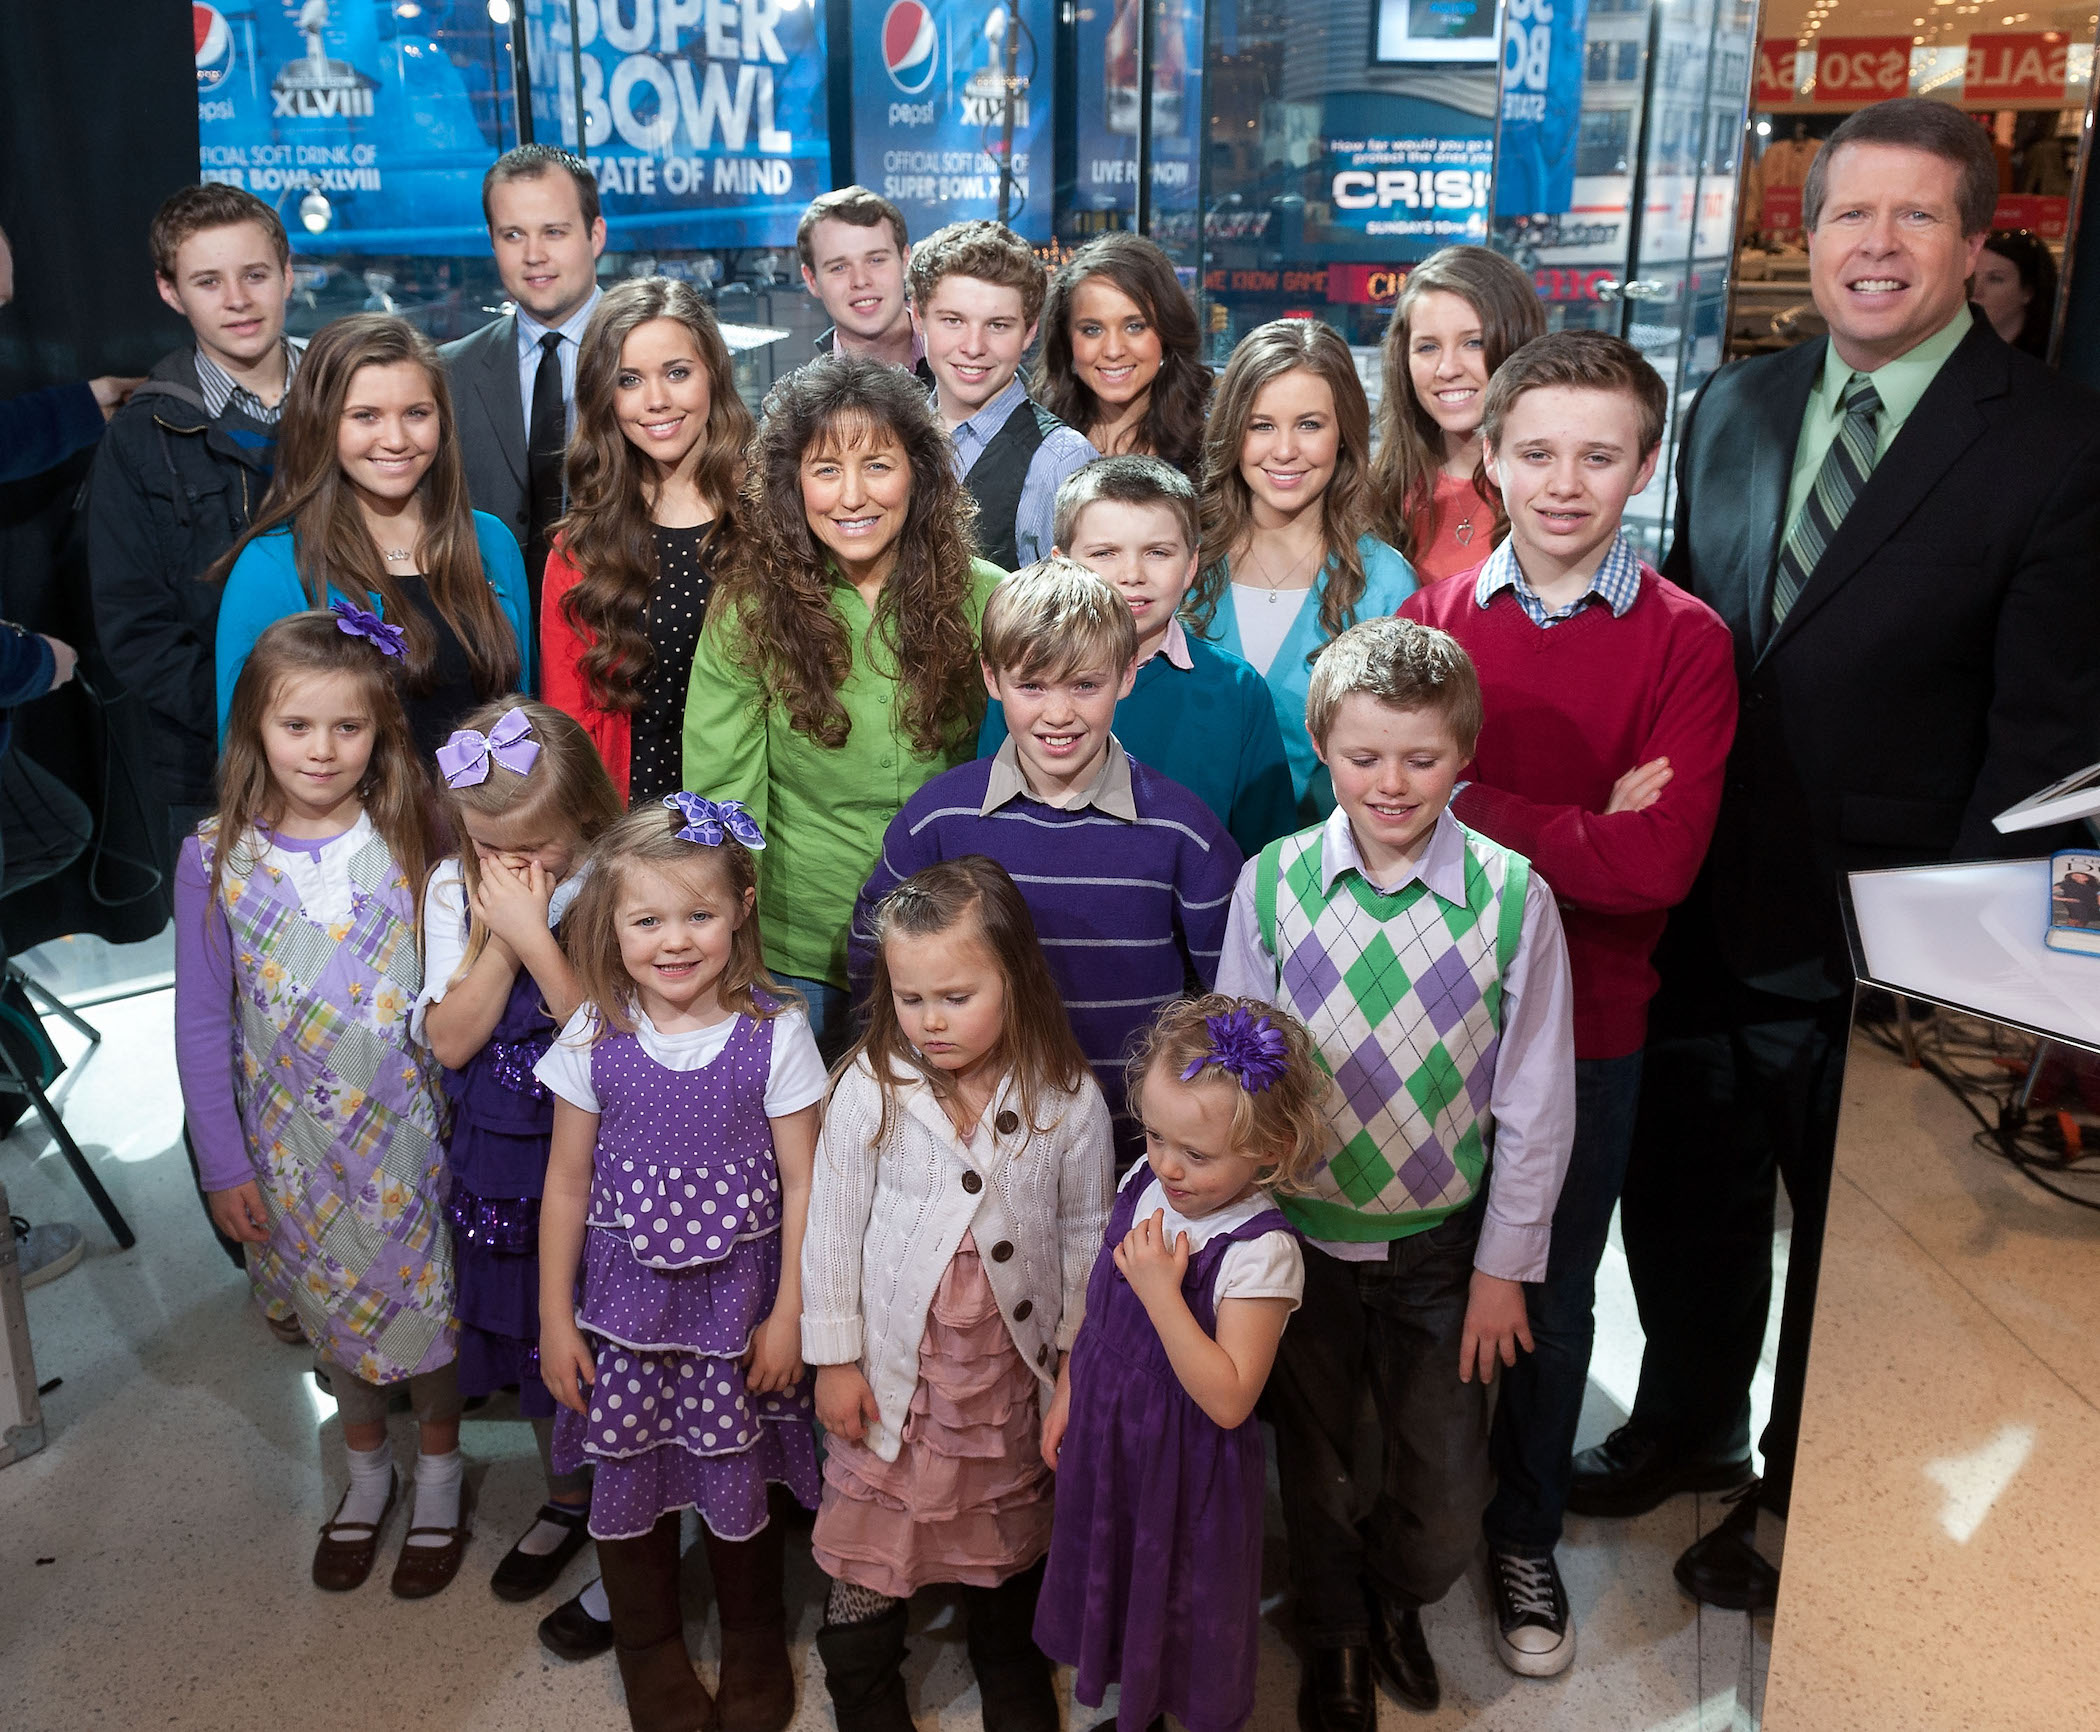 The Duggar family from TLC's 'Counting On' standing together and smiling on the set of 'Extra' for a Duggar news segment